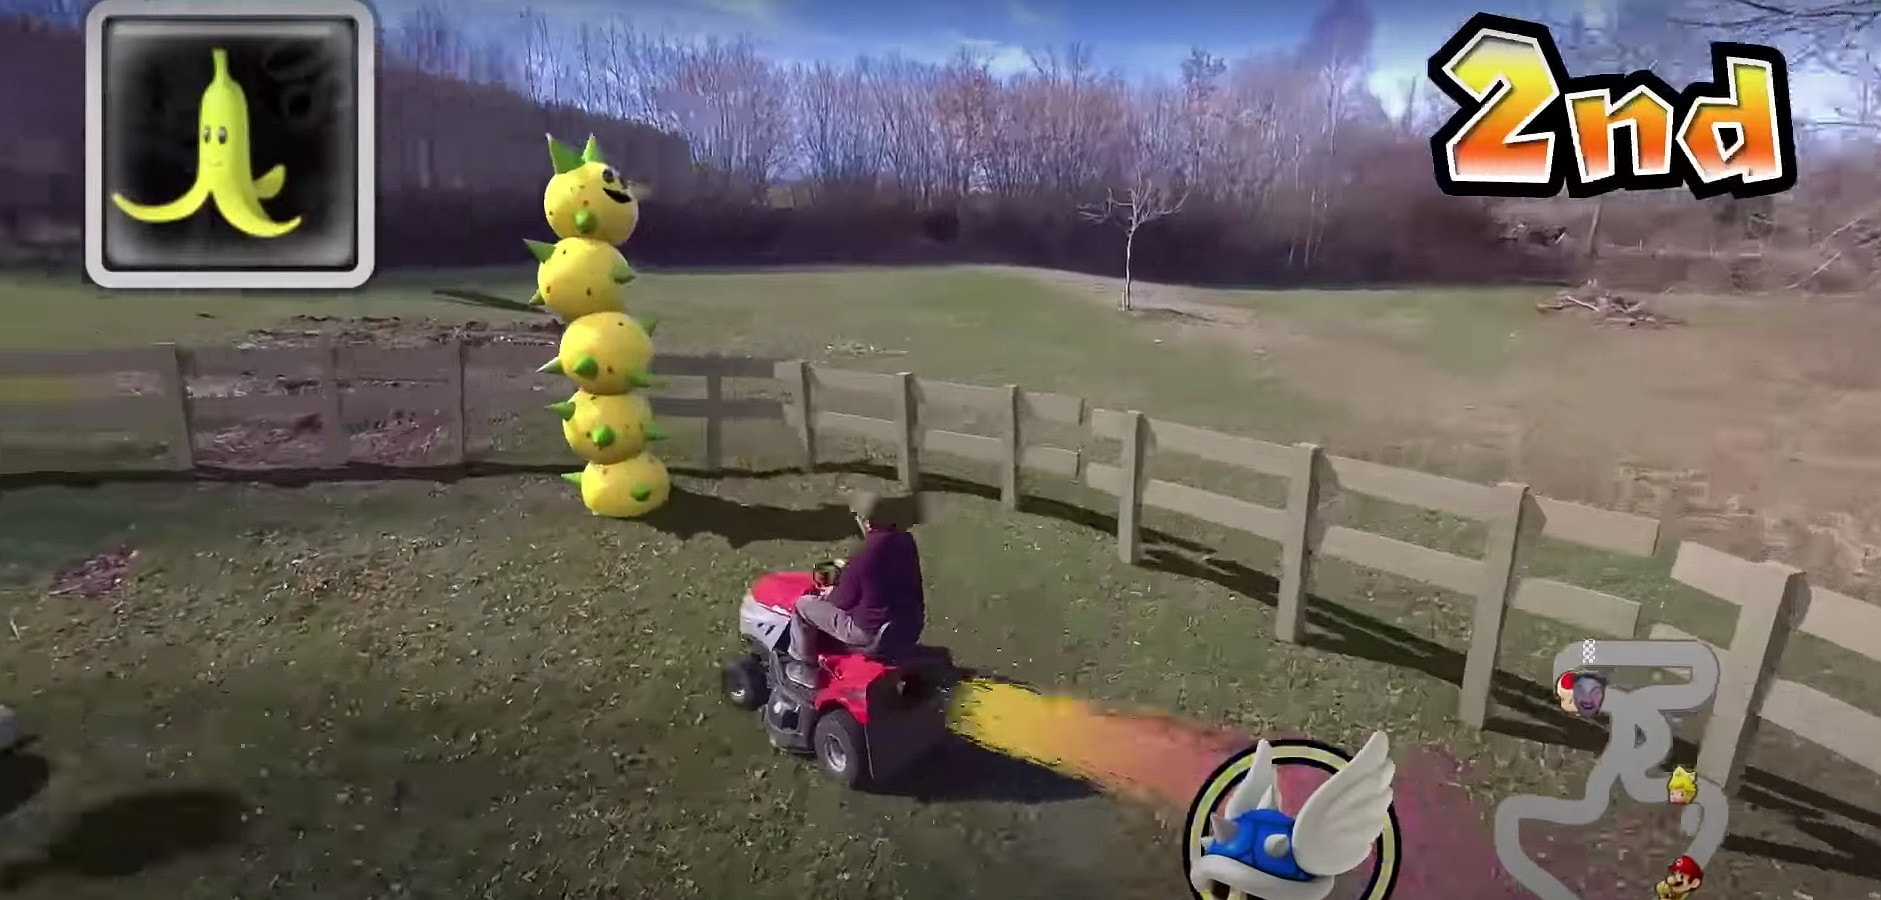 Guy Plays Real-Life Mario Kart With a Lawn Mower and a Skydio